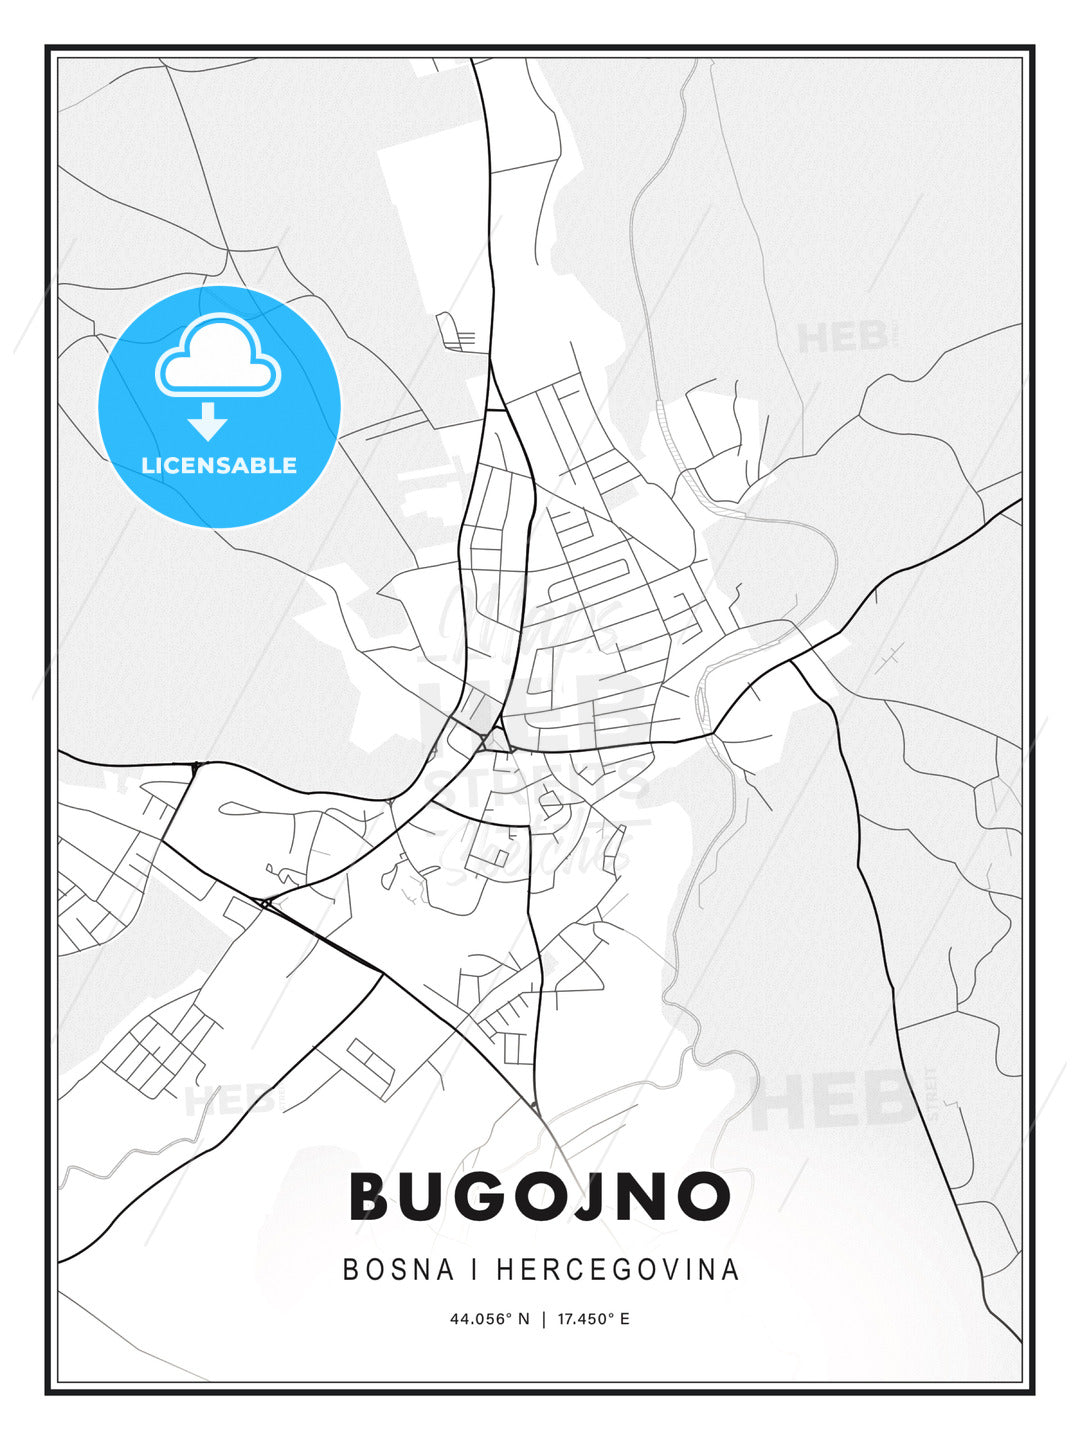 Bugojno, Bosnia and Herzegovina, Modern Print Template in Various Formats - HEBSTREITS Sketches